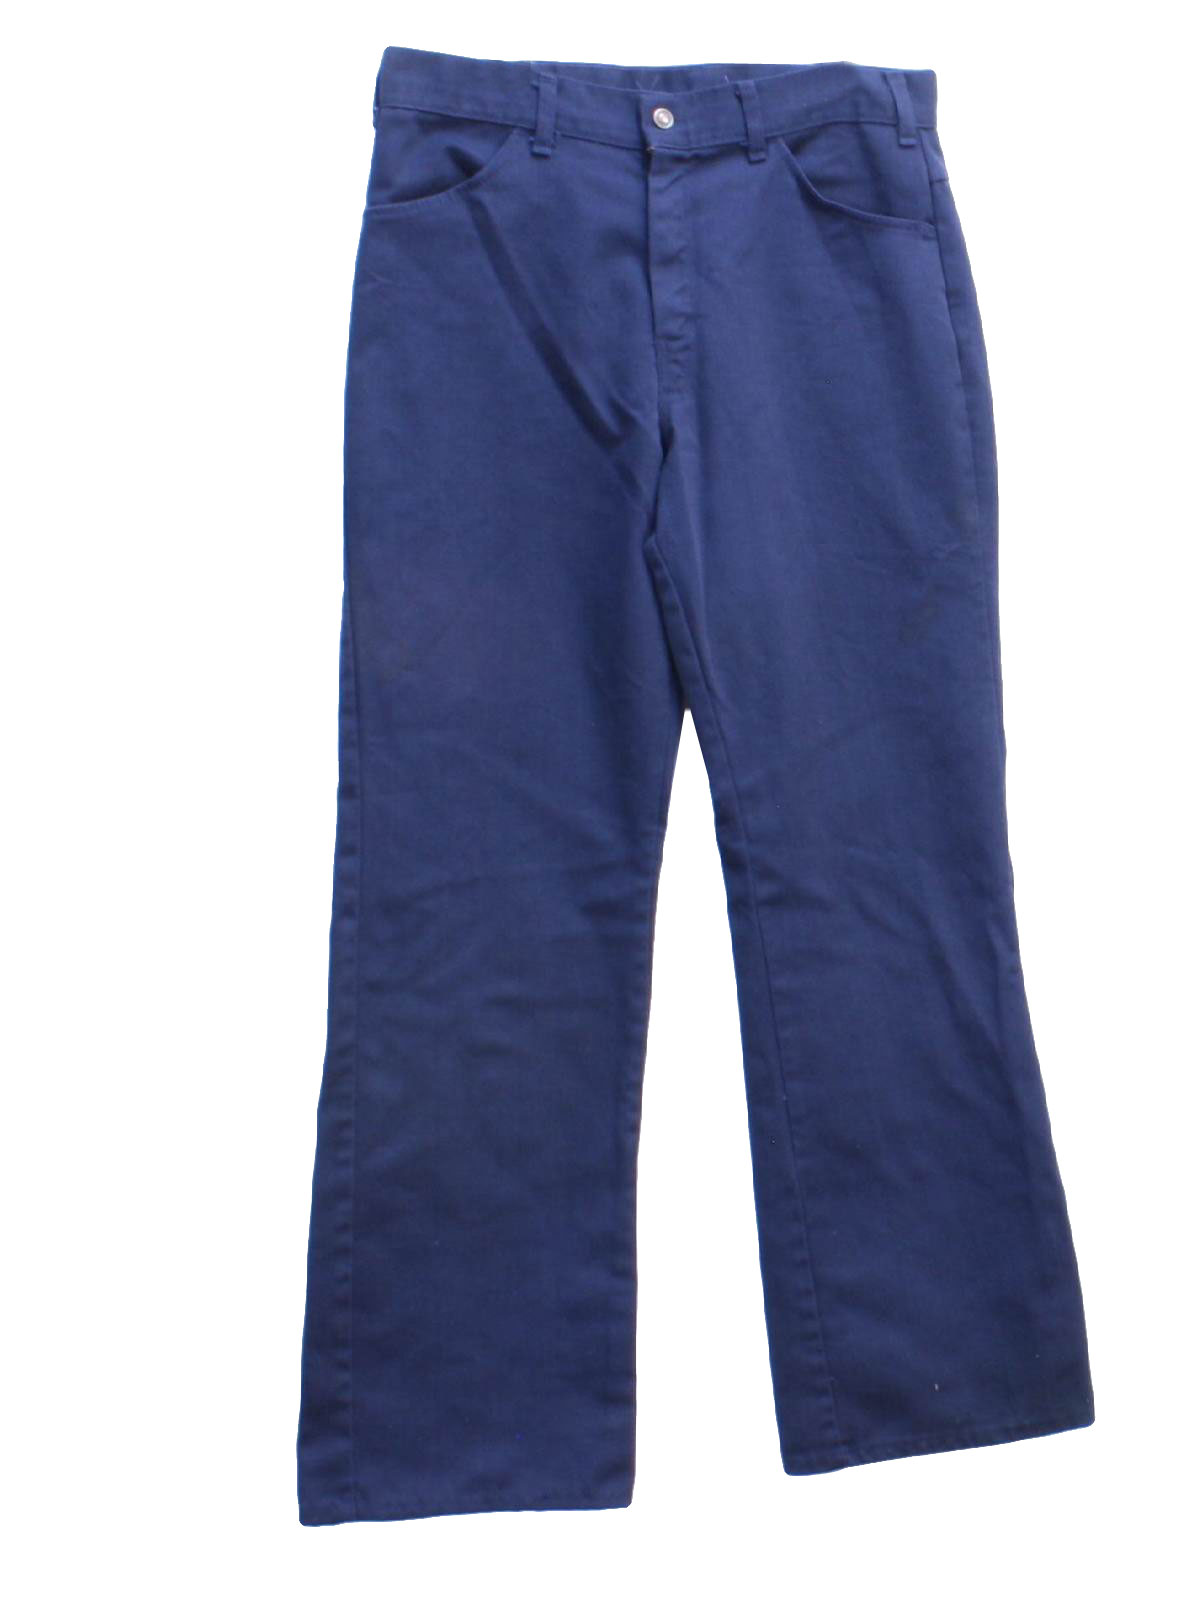 1970's Flared Pants / Flares: 70s -No Label- Mens navy blue cotton ...